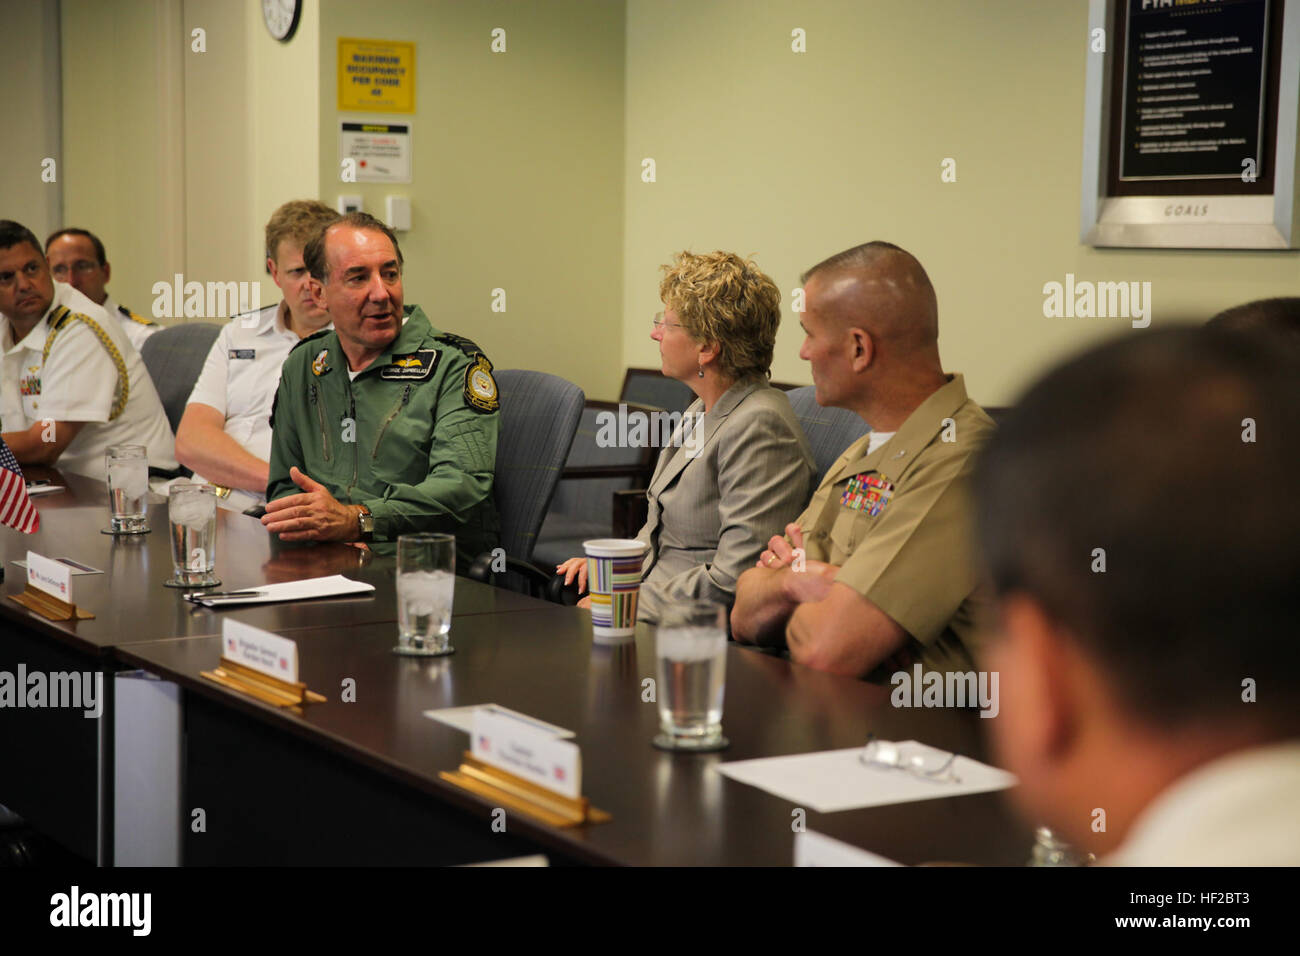 The First Sea Lord and Chief of Naval Staff of the British Royal Navy, Adm. Sir George Zambellas, left, attends a brief with U.S. Marine Corps and Navy personnel at the Missile Defense Agency at Dahlgren, Va., July 29, 2014. Zambellas is taking part in the Commandant of the Marine Corps' Counterpart Program, which invites foreign military leaders to visit the United States and interact with U.S. military leaders. (U.S. Marine Corps photo by Cpl. Michael C. Guinto/Released) First Sea Lord Counterpart Visit 140729-M-LI307-485 Stock Photo